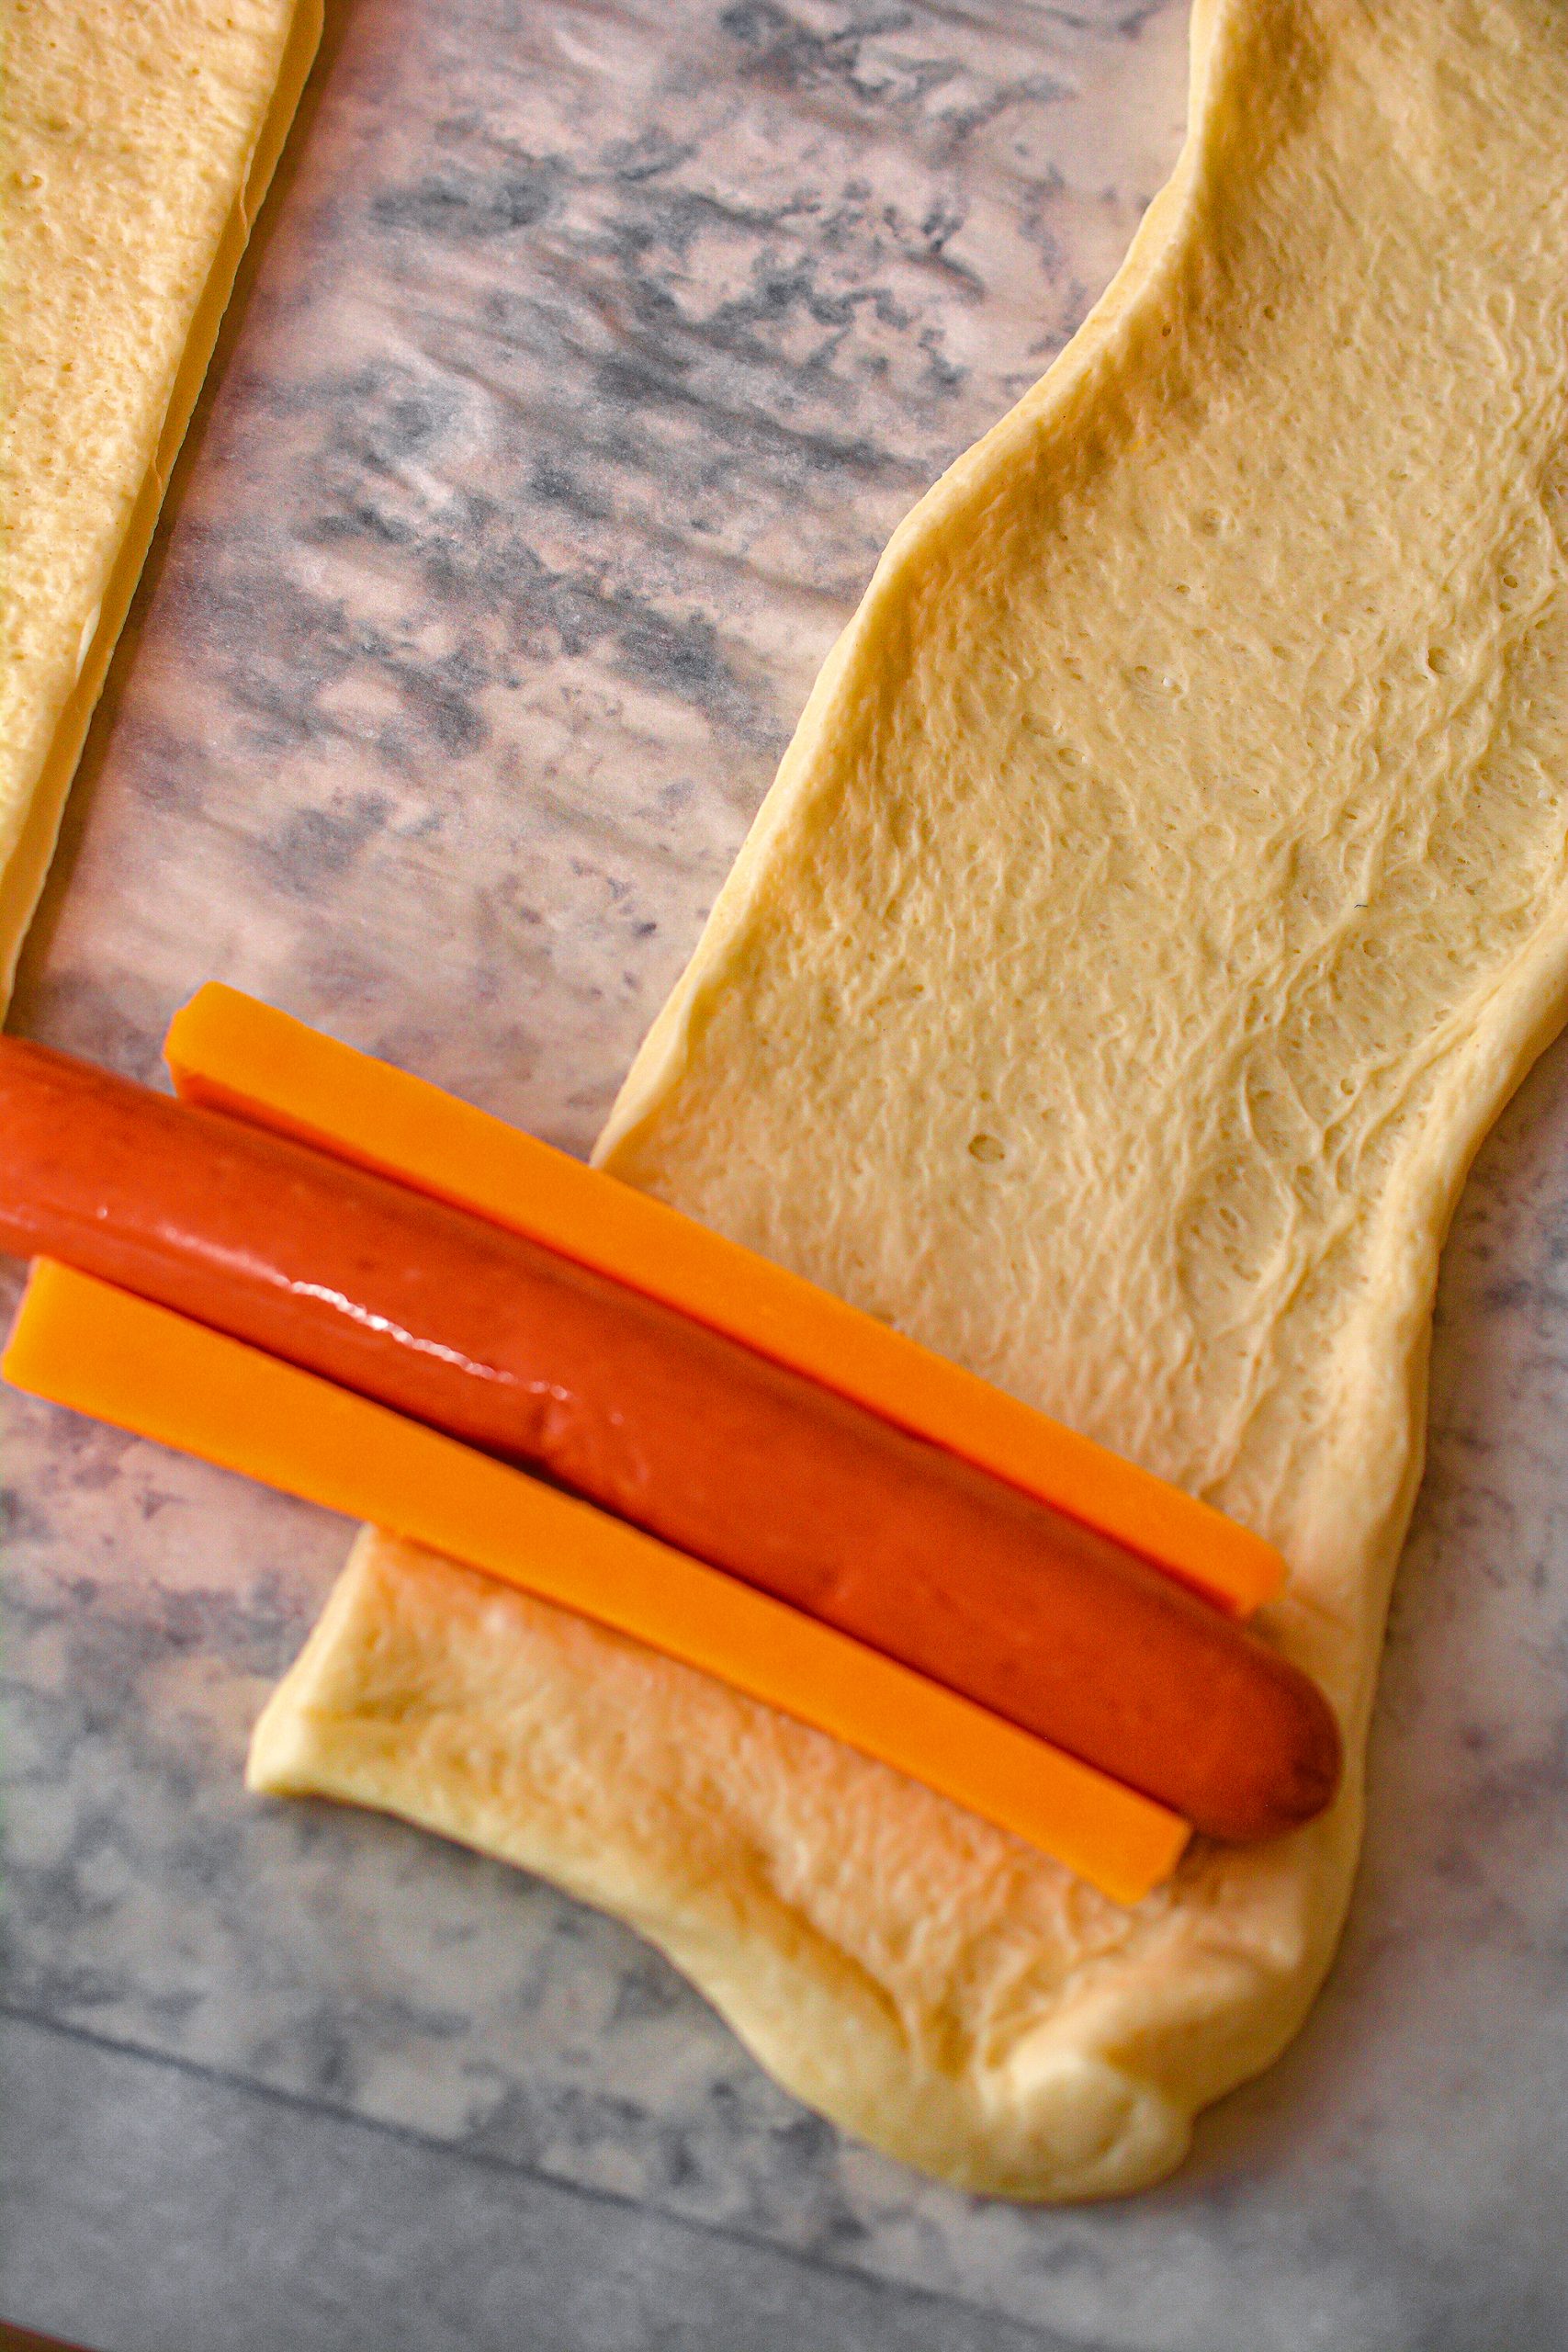 Add a hot dog with one piece of cheese stick on each side to one end of a piece of dough, and roll the dough around the hot dog and cheese sticks, overlapping the layers as you go.